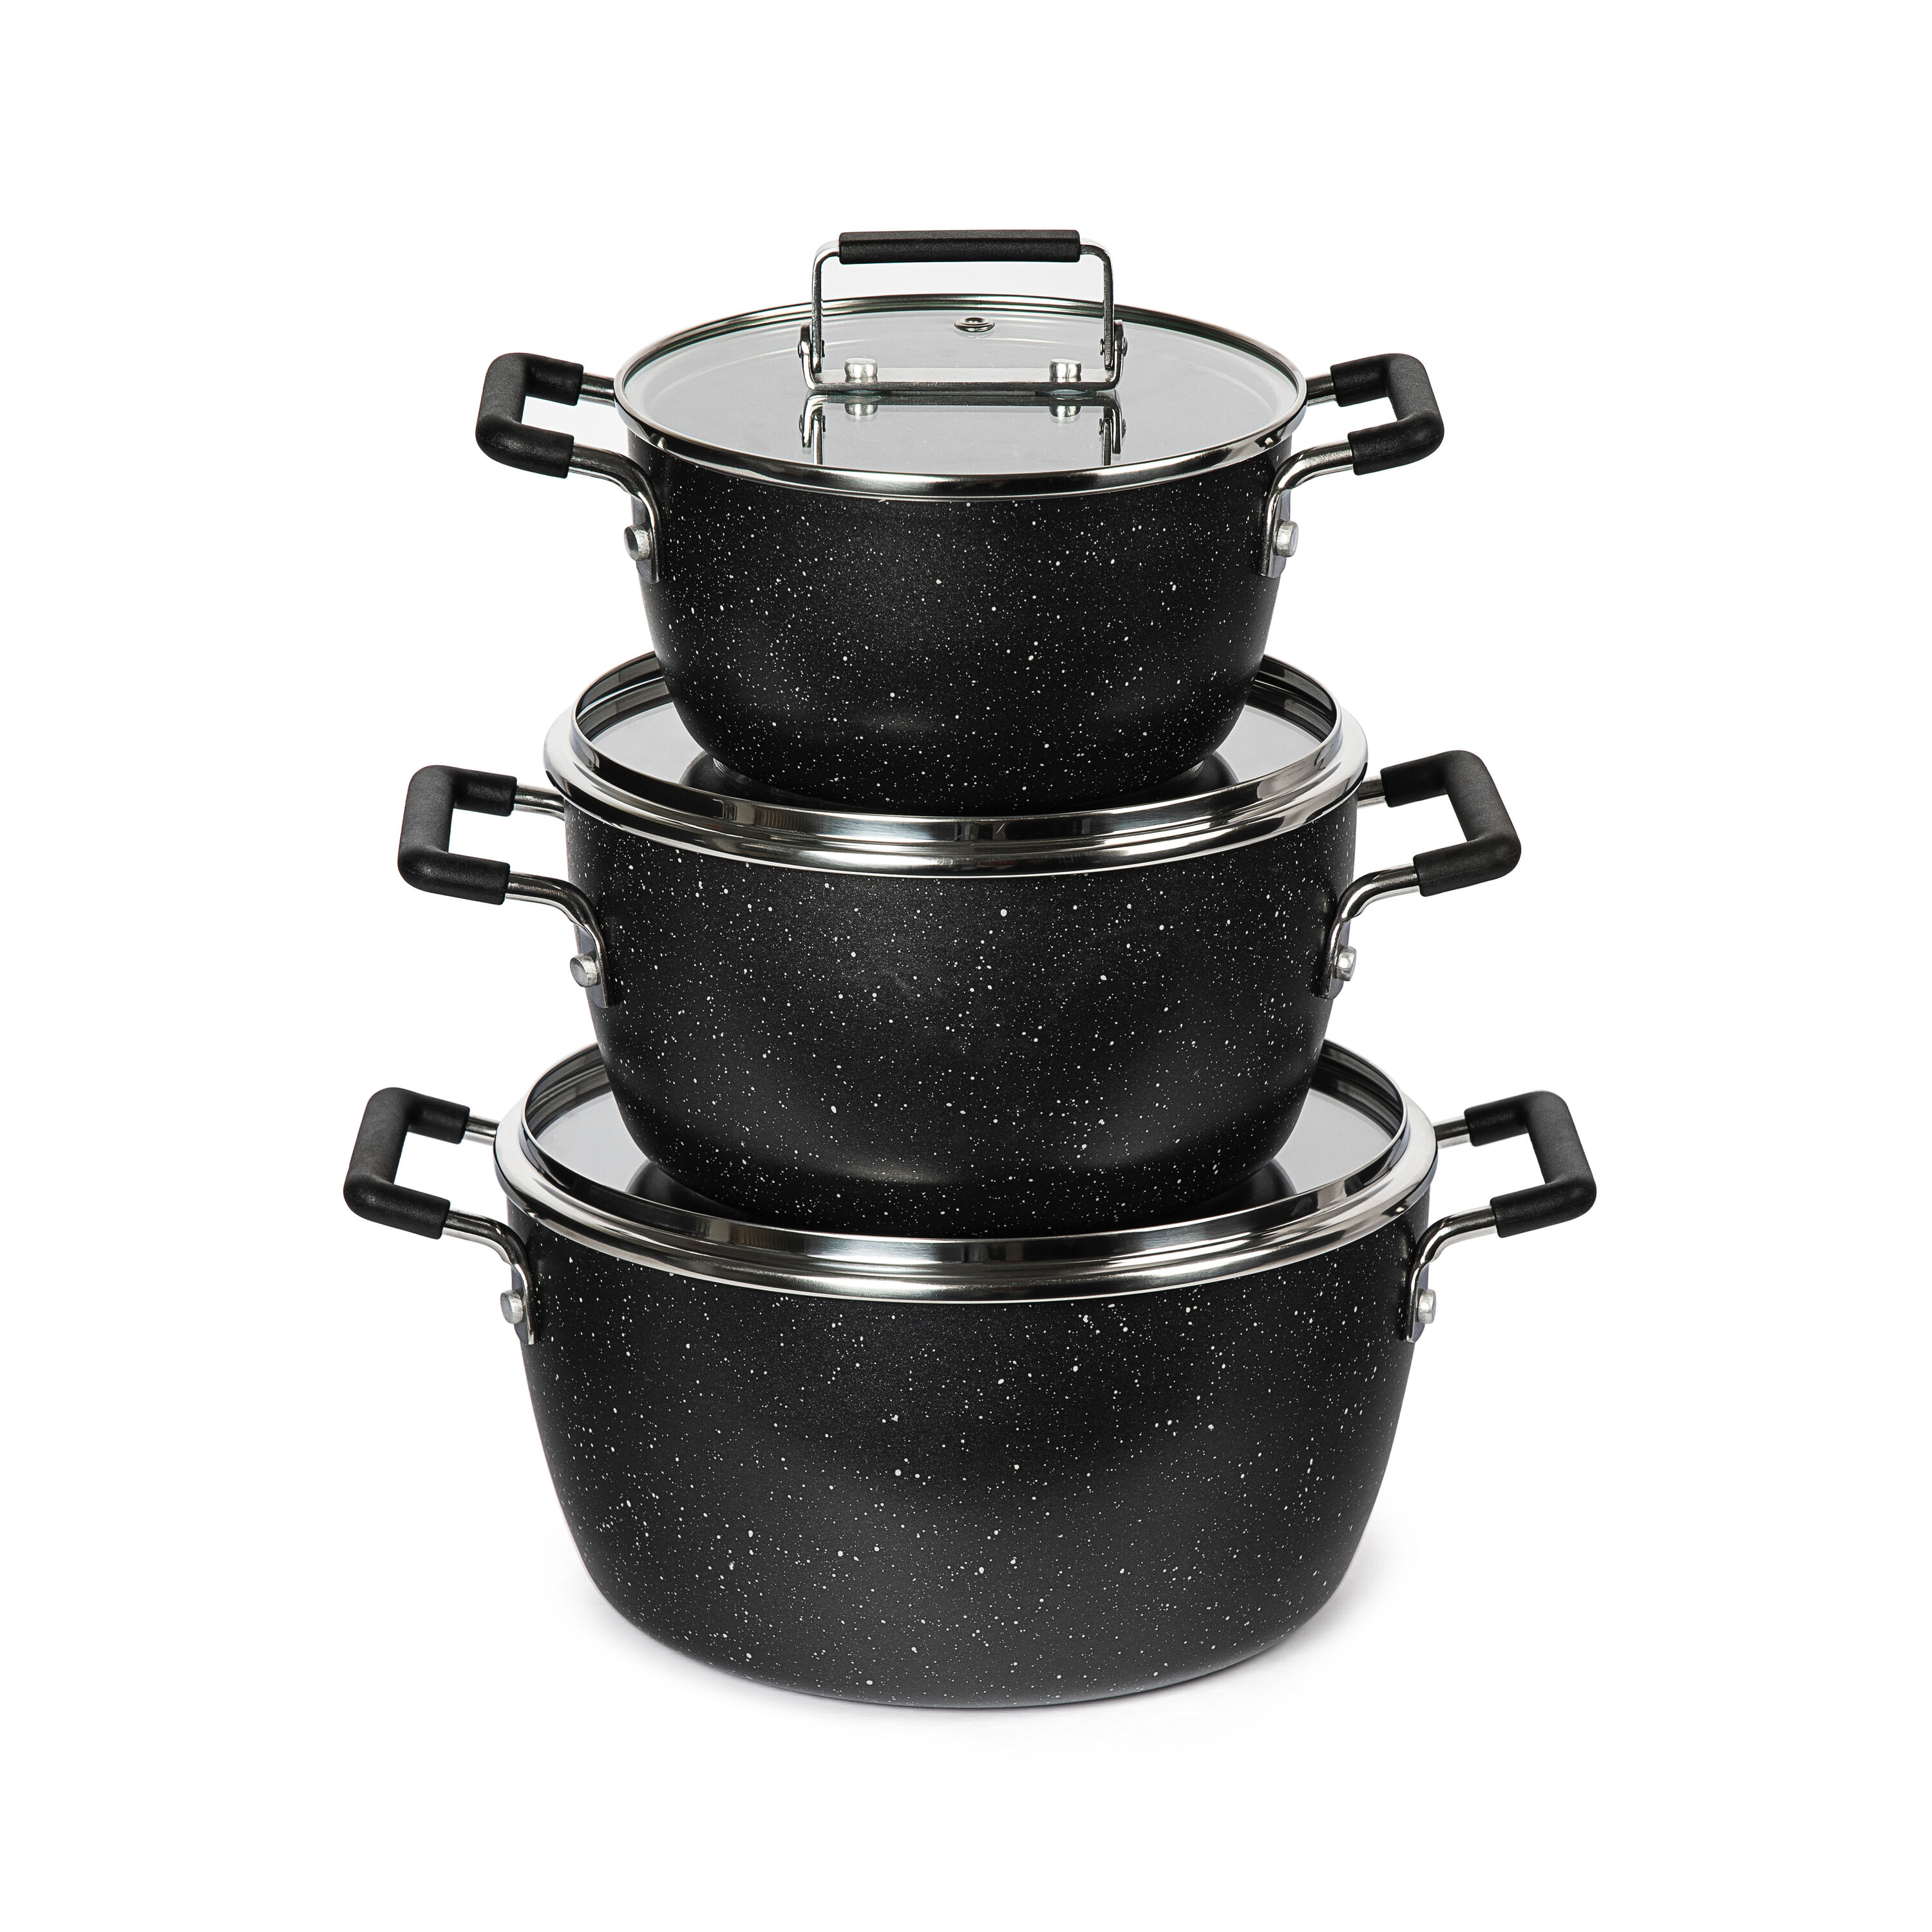 Gotham Steel Nonstick 5 Quart Stock Pot with Lid, Ultra Durable Mineral and Diamond Triple Coated Surface,100% PFOA Free, Stockpot with Stay Cool